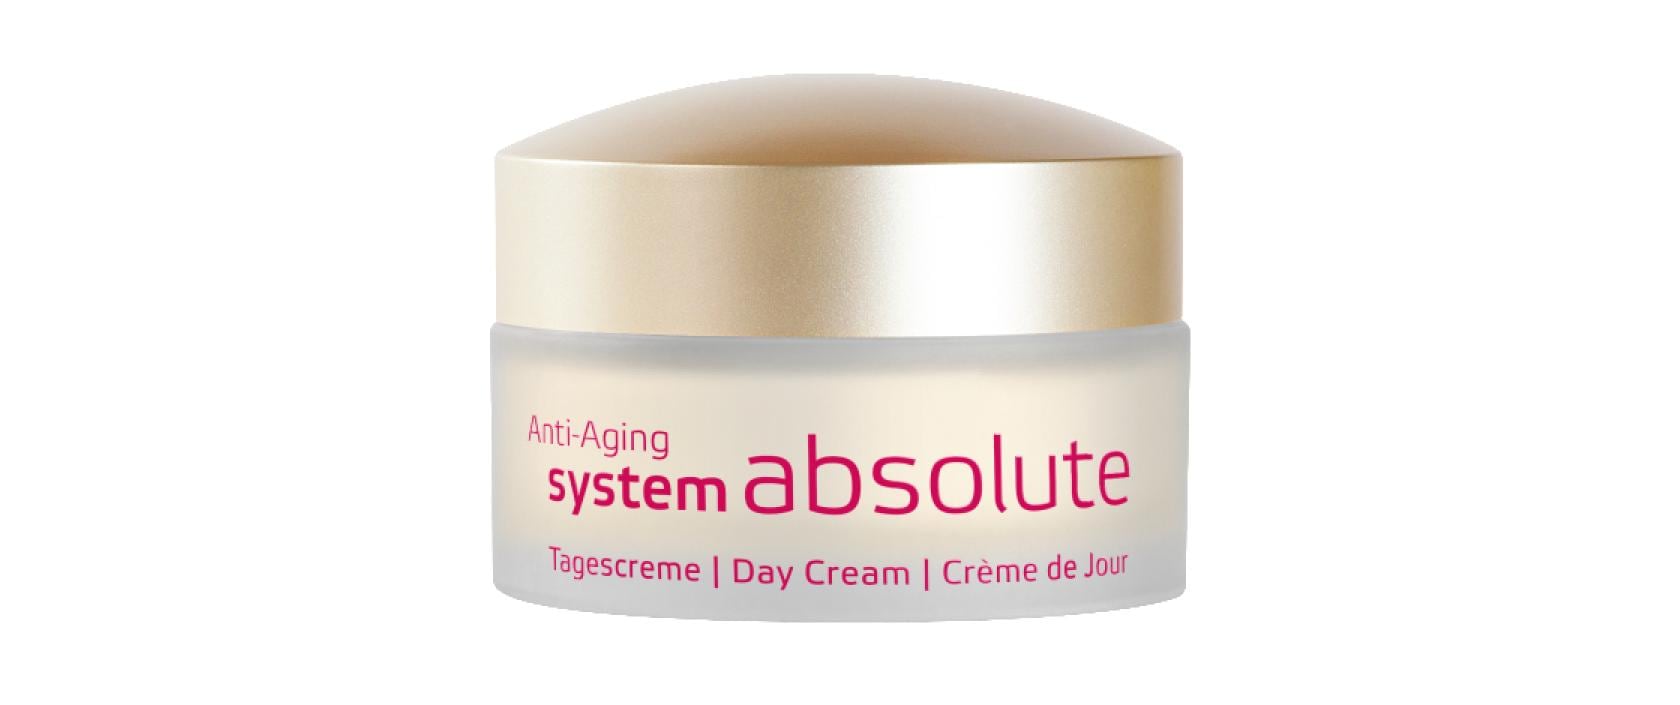 Anti-Aging-Creme »Abs«, Biologisch